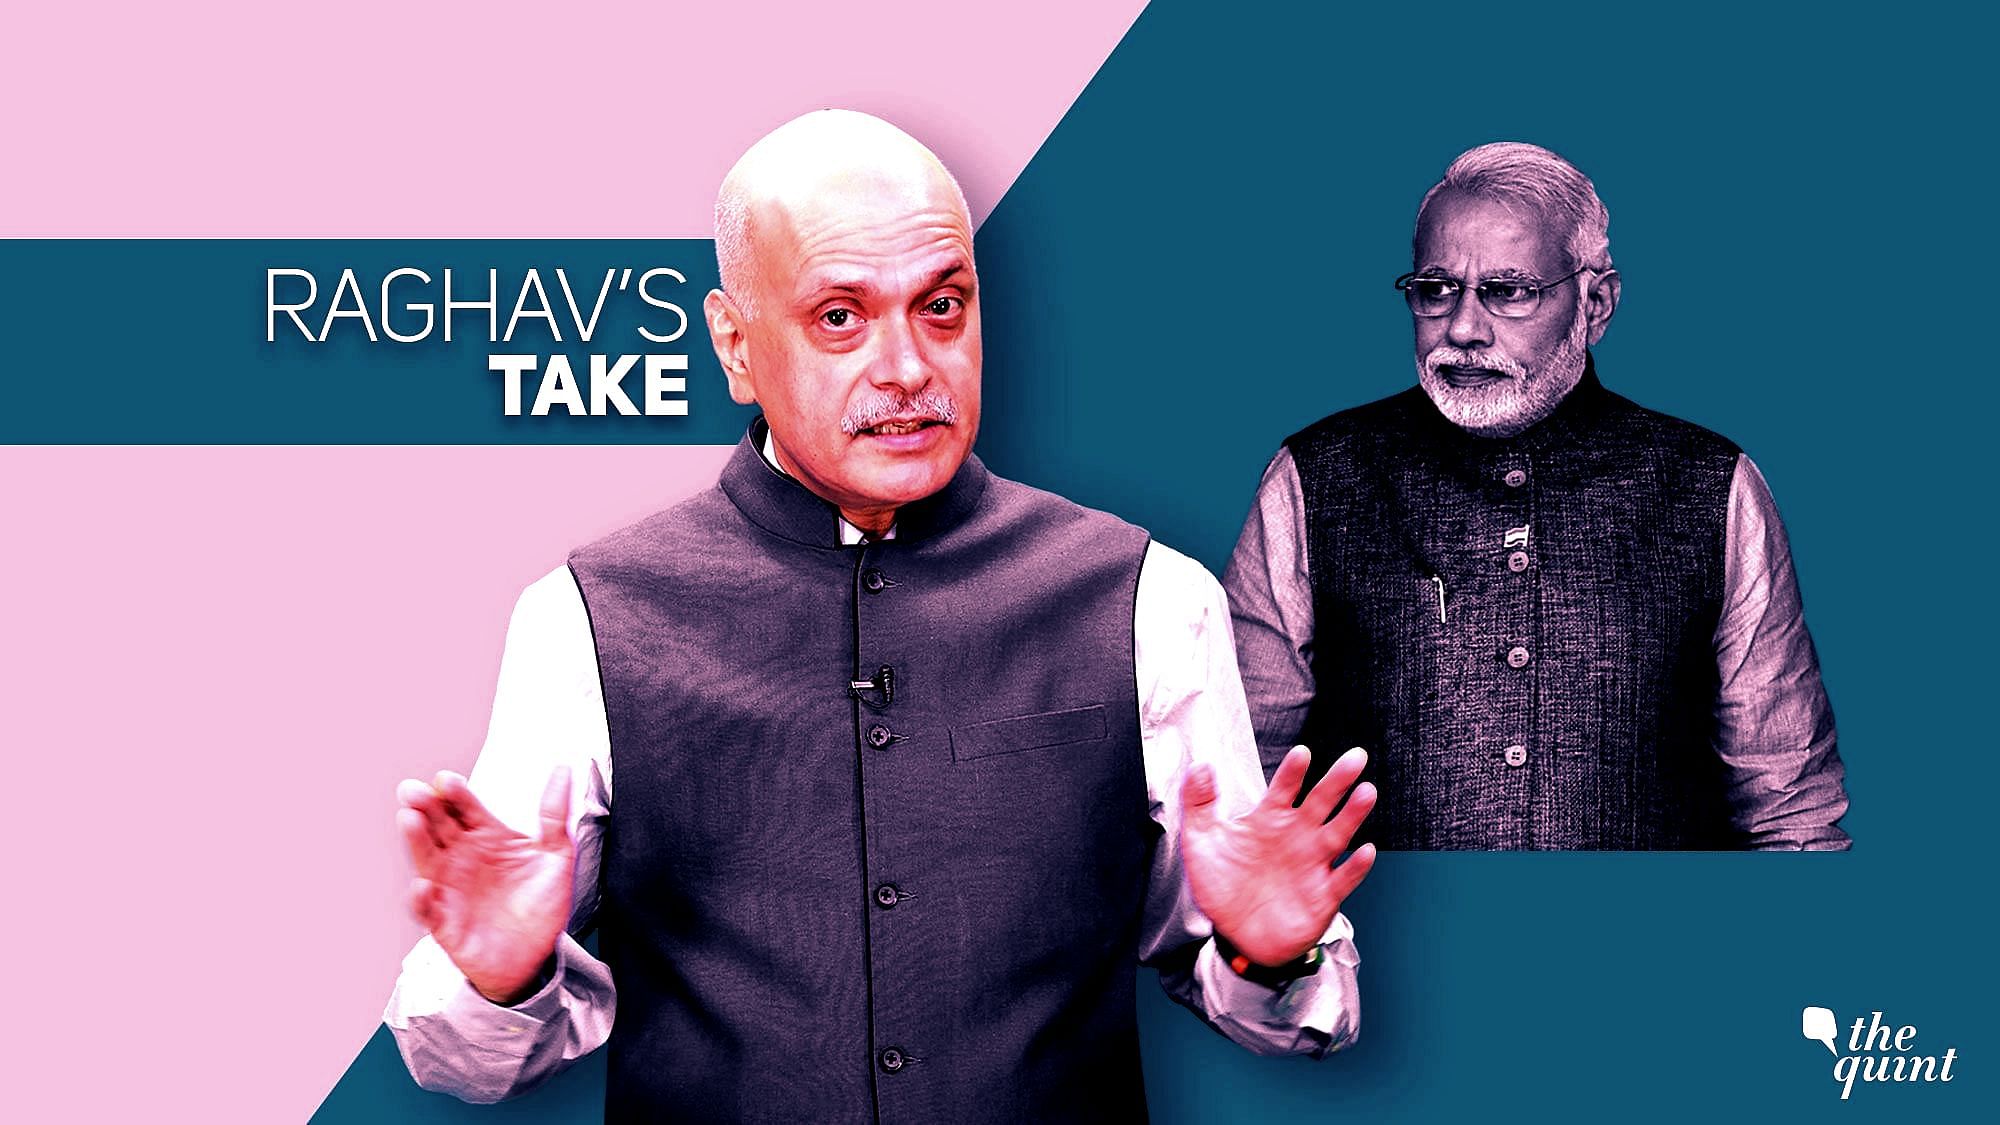 <div class="paragraphs"><p>The Quint’s Editor-in-Chief Raghav Bahl shares his views on PM Narendra Modi's Cabinet reshuffle.</p></div>